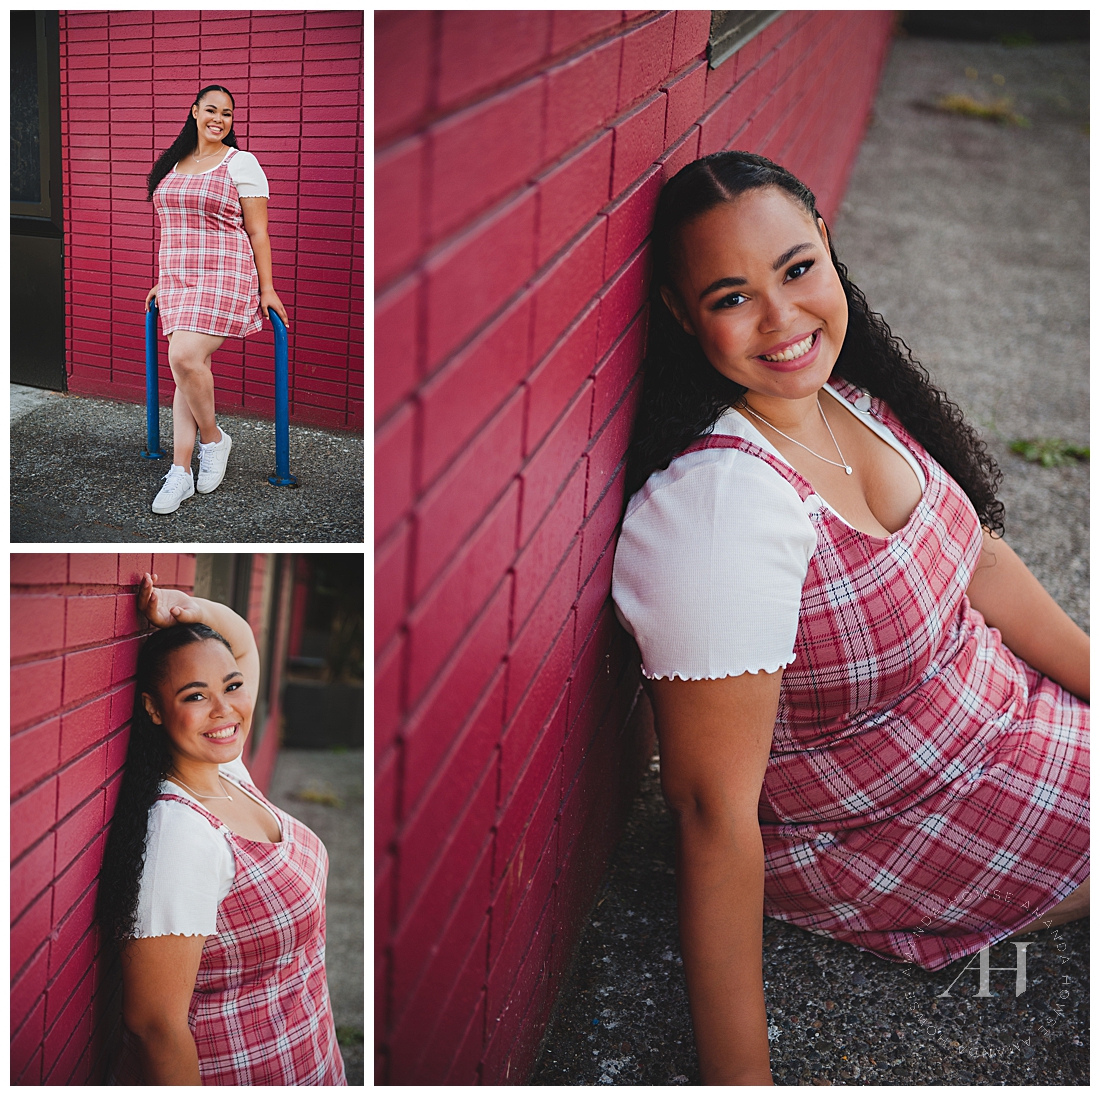 Senior Shoot with Red Brick Wall Background | Cute Urban Senior Pics for High School Girls | Photographed by the Best Tacoma Senior Photographer Amanda Howse Photography